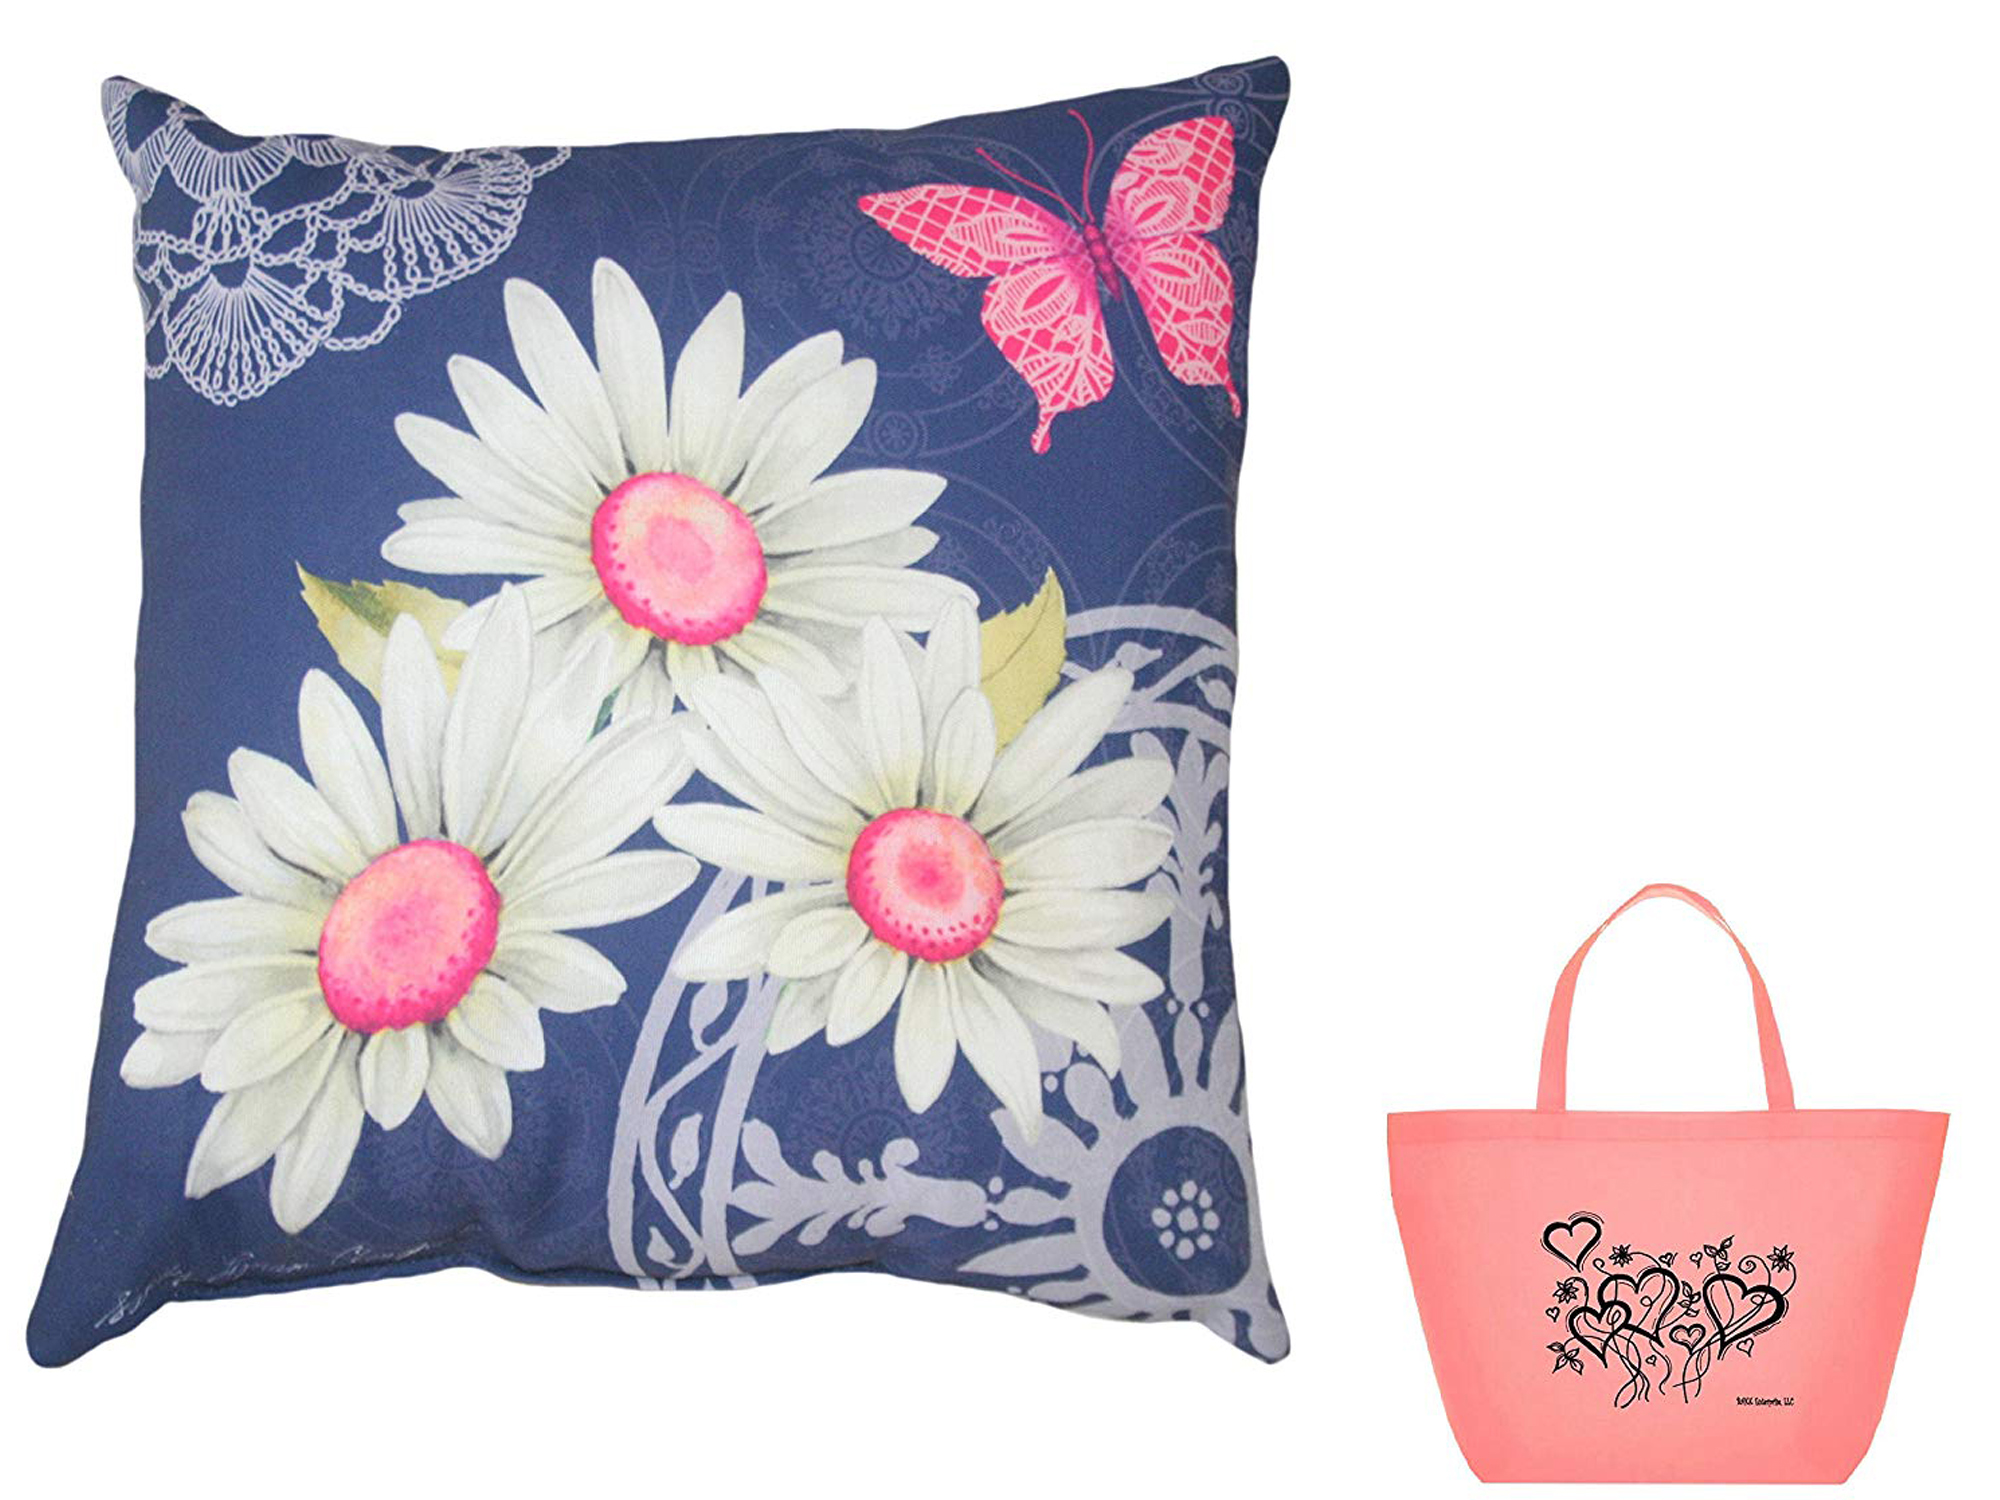 Indigo Spring Floral Indoor/Outdoor Pillow & Tote 2 Piece Gift Set - image 1 of 1